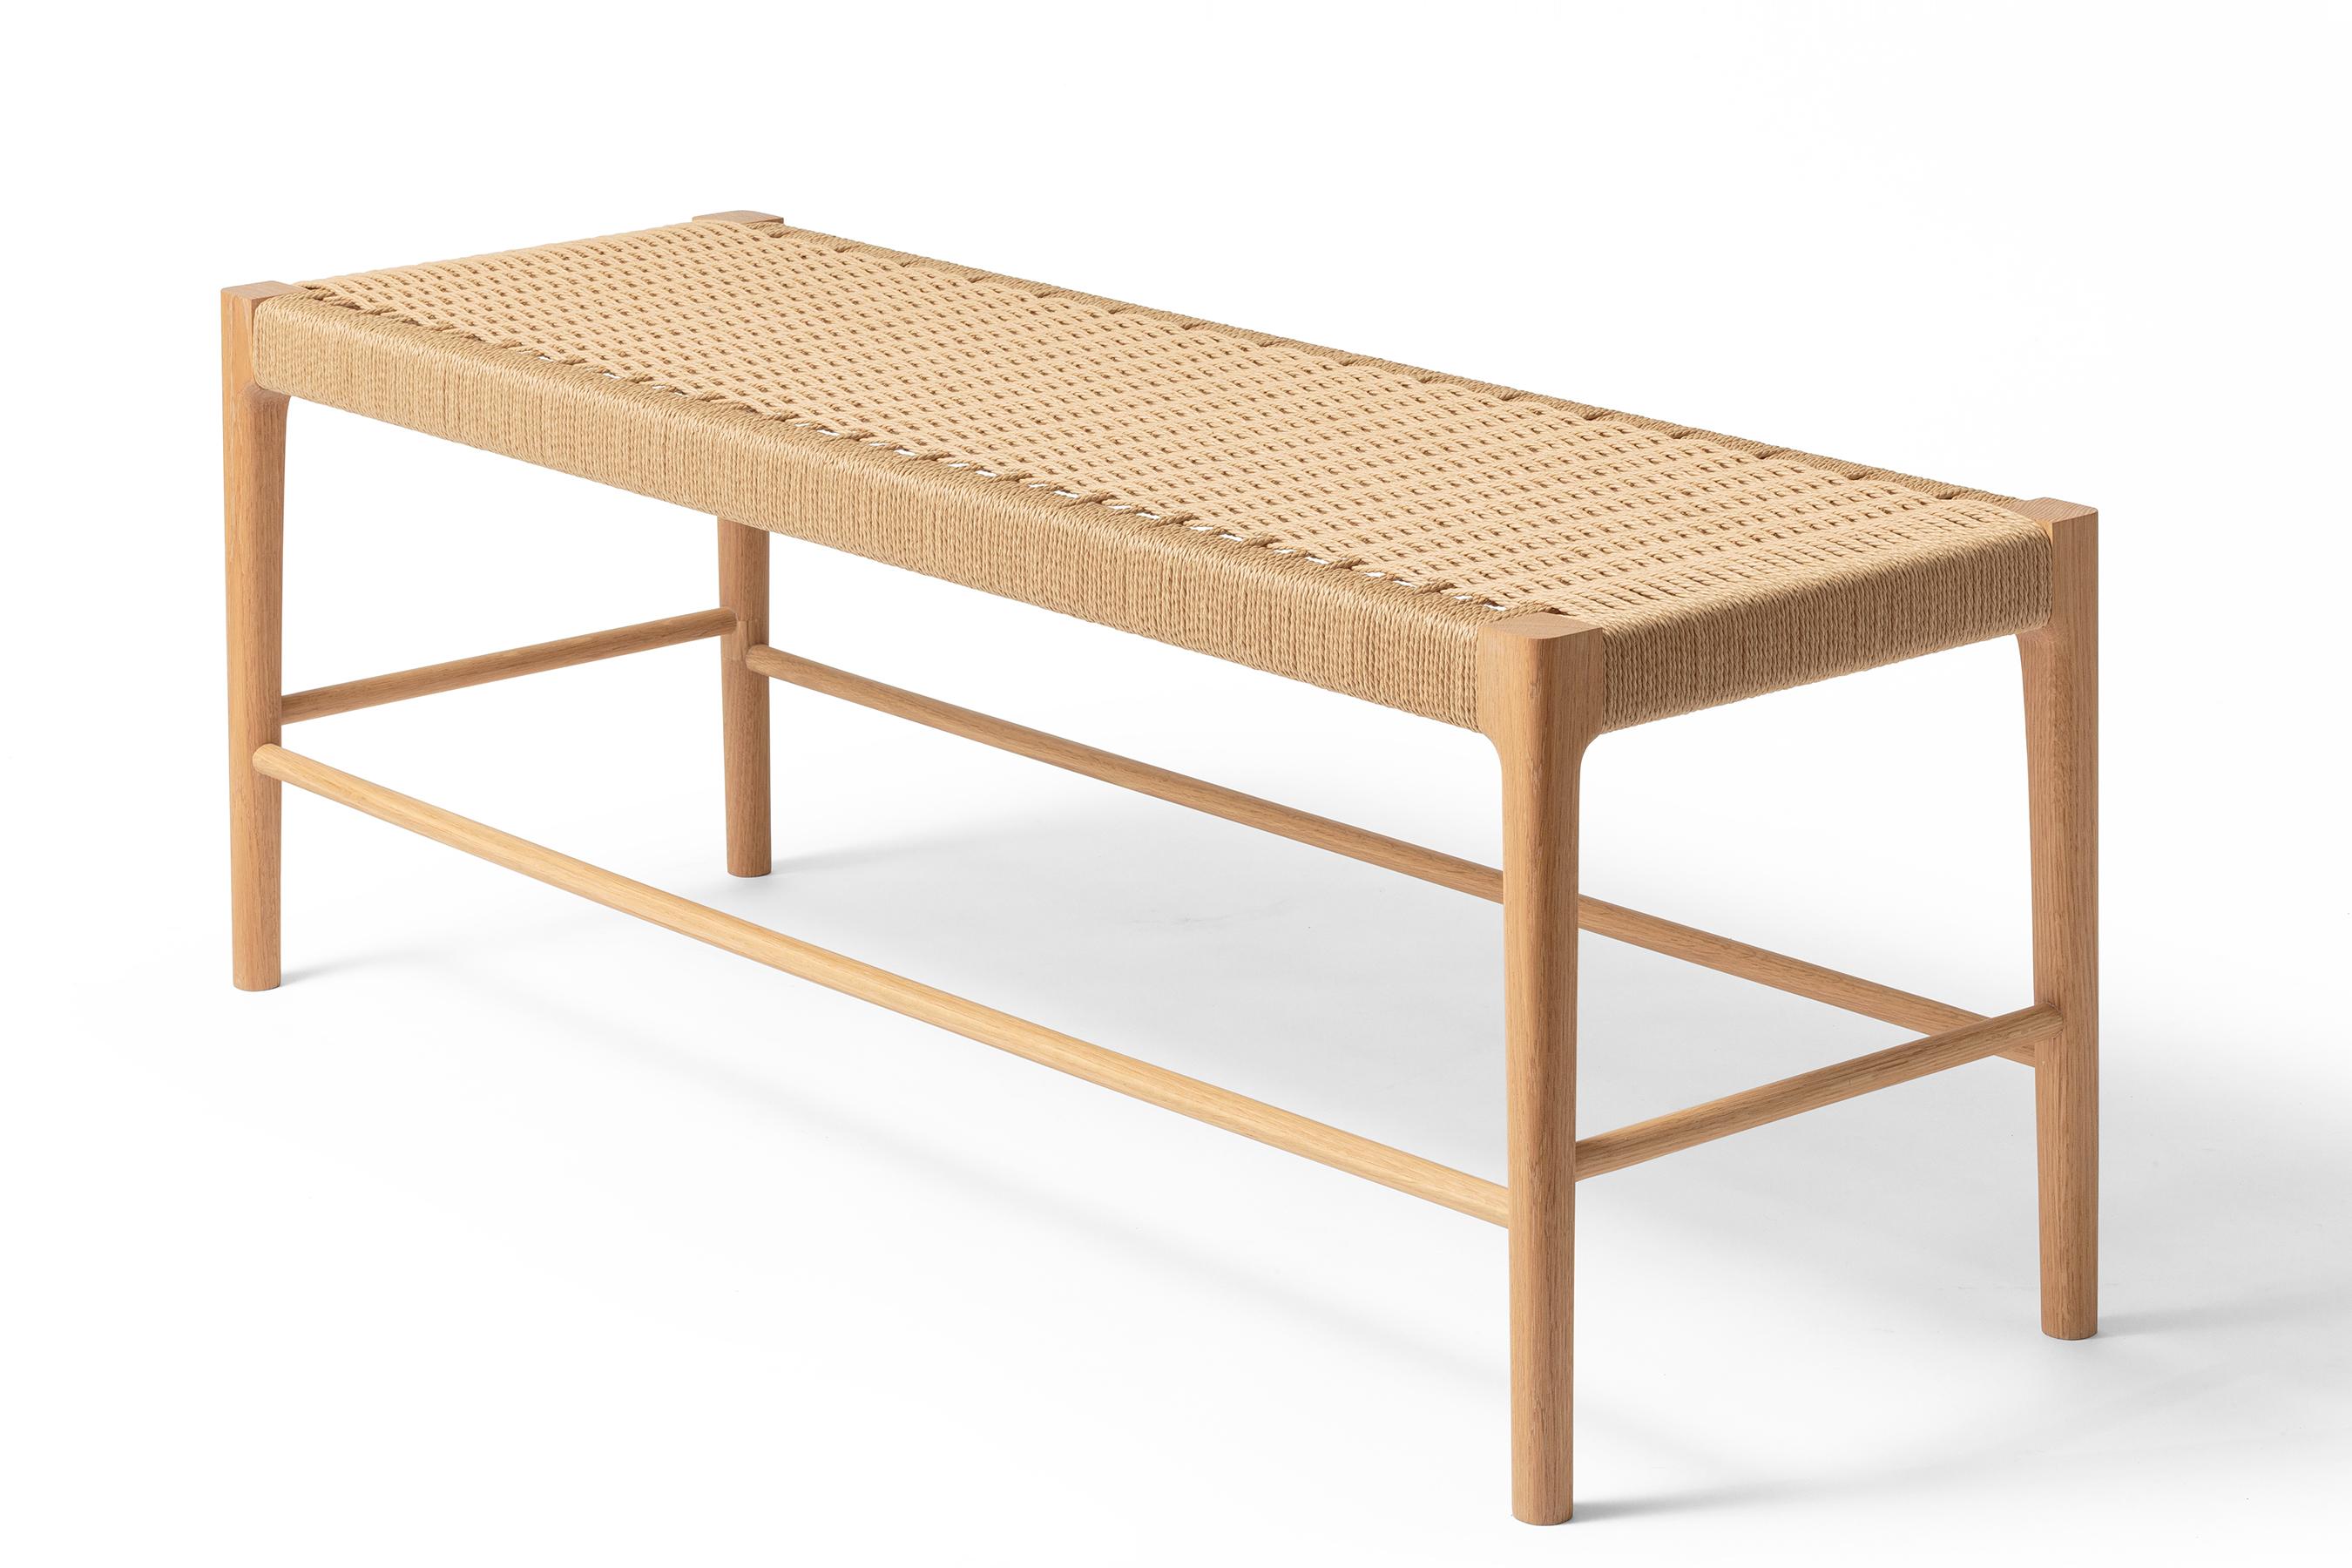 Featuring a mortice and tenon frame, custom doweling and a handwoven seat, the Papyri Bench is artisan-crafted from recyclable paper cord, and North American White Oak.

The seat features a continuous run of Danish paper cord woven around 